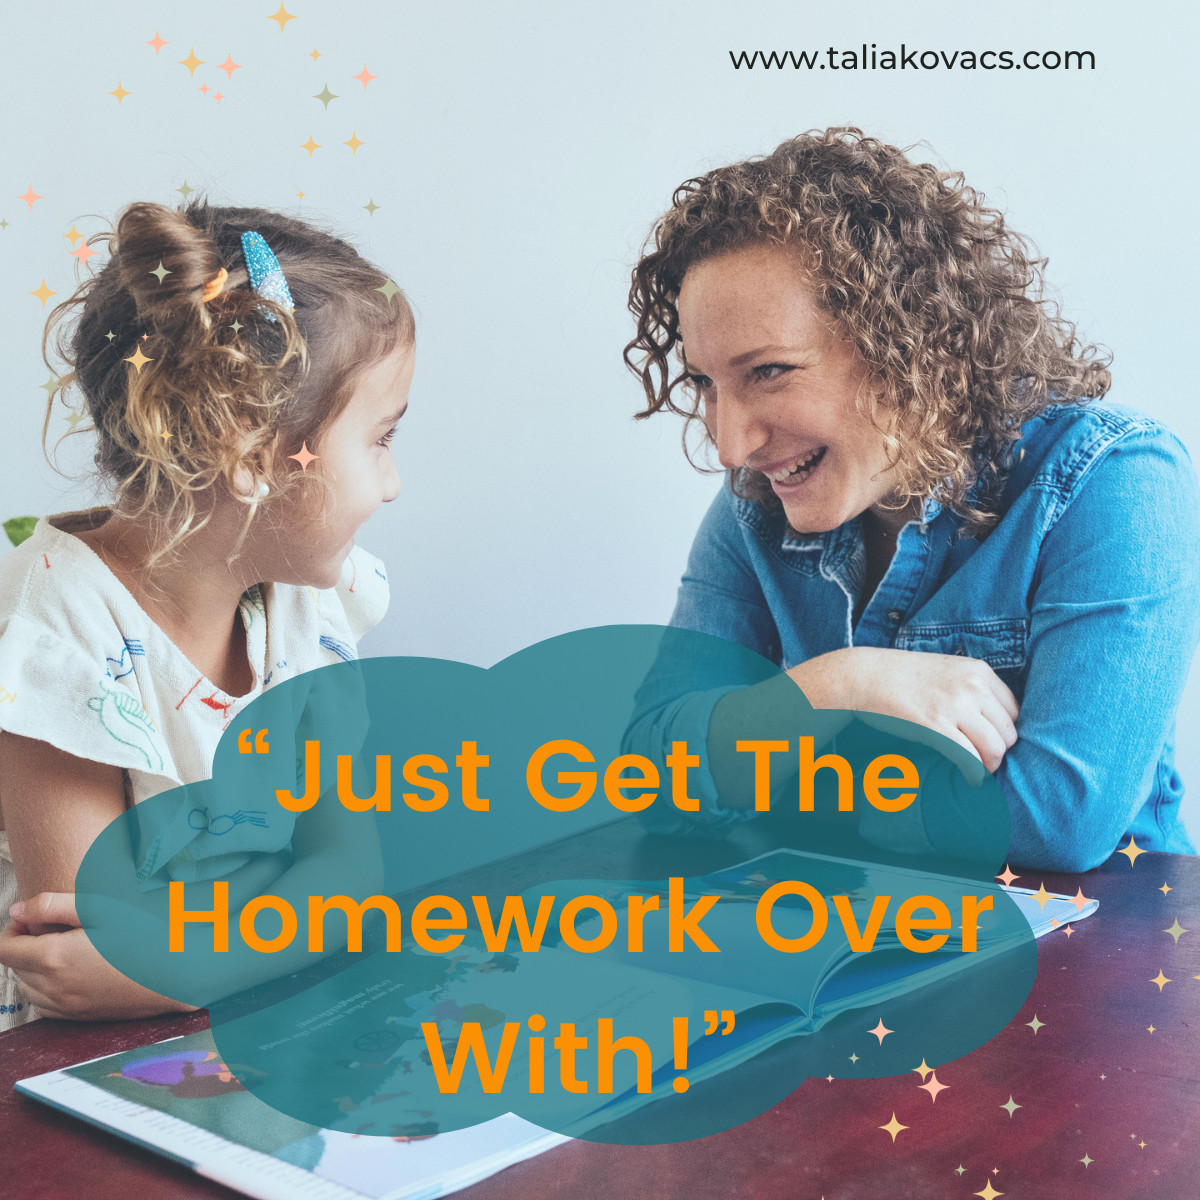 Child and Adult talking over homework books